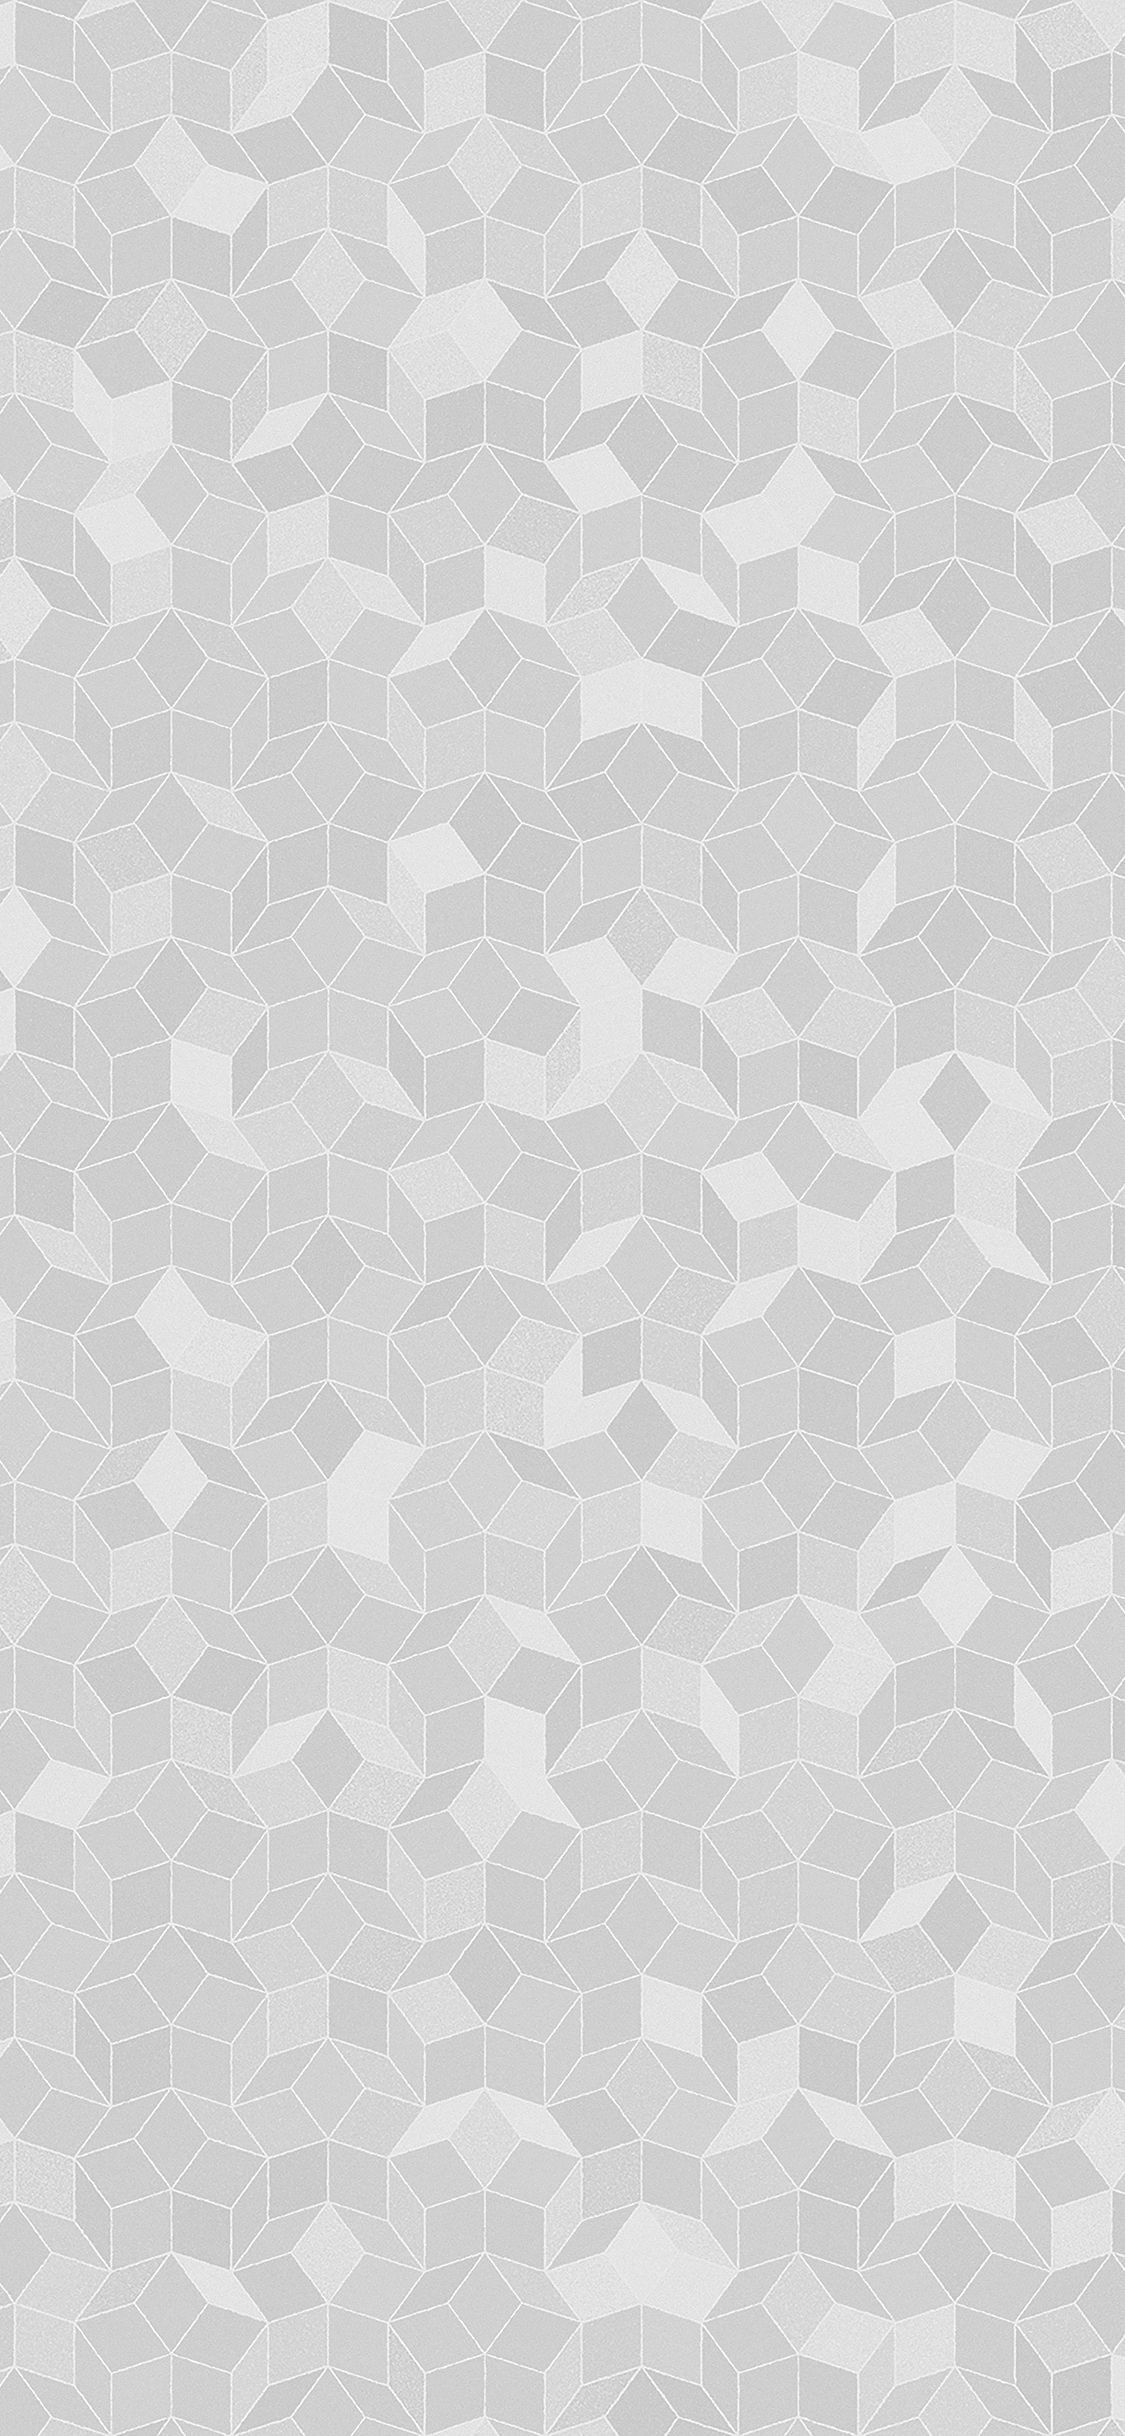 A wallpaper with a light grey geometric pattern - Silver